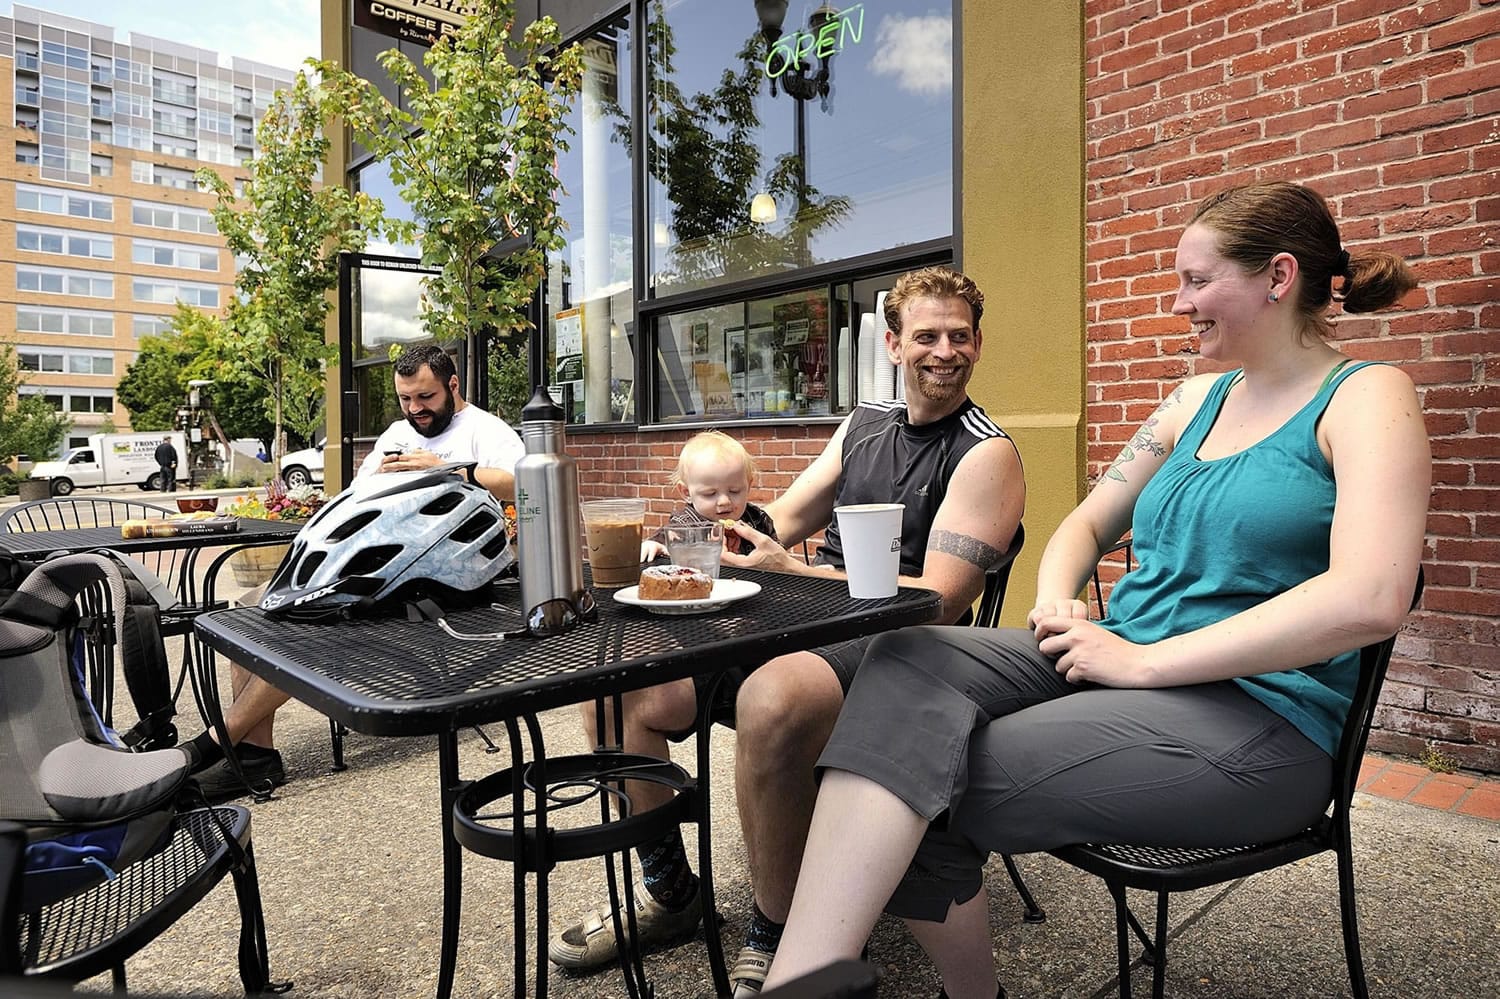 Portland residents Rachel Fitch and her fiance Matt Reynolds, center, said downtown Vancouver's restaurants and coffee shops draw them and their 11-month-old son Joey to town.